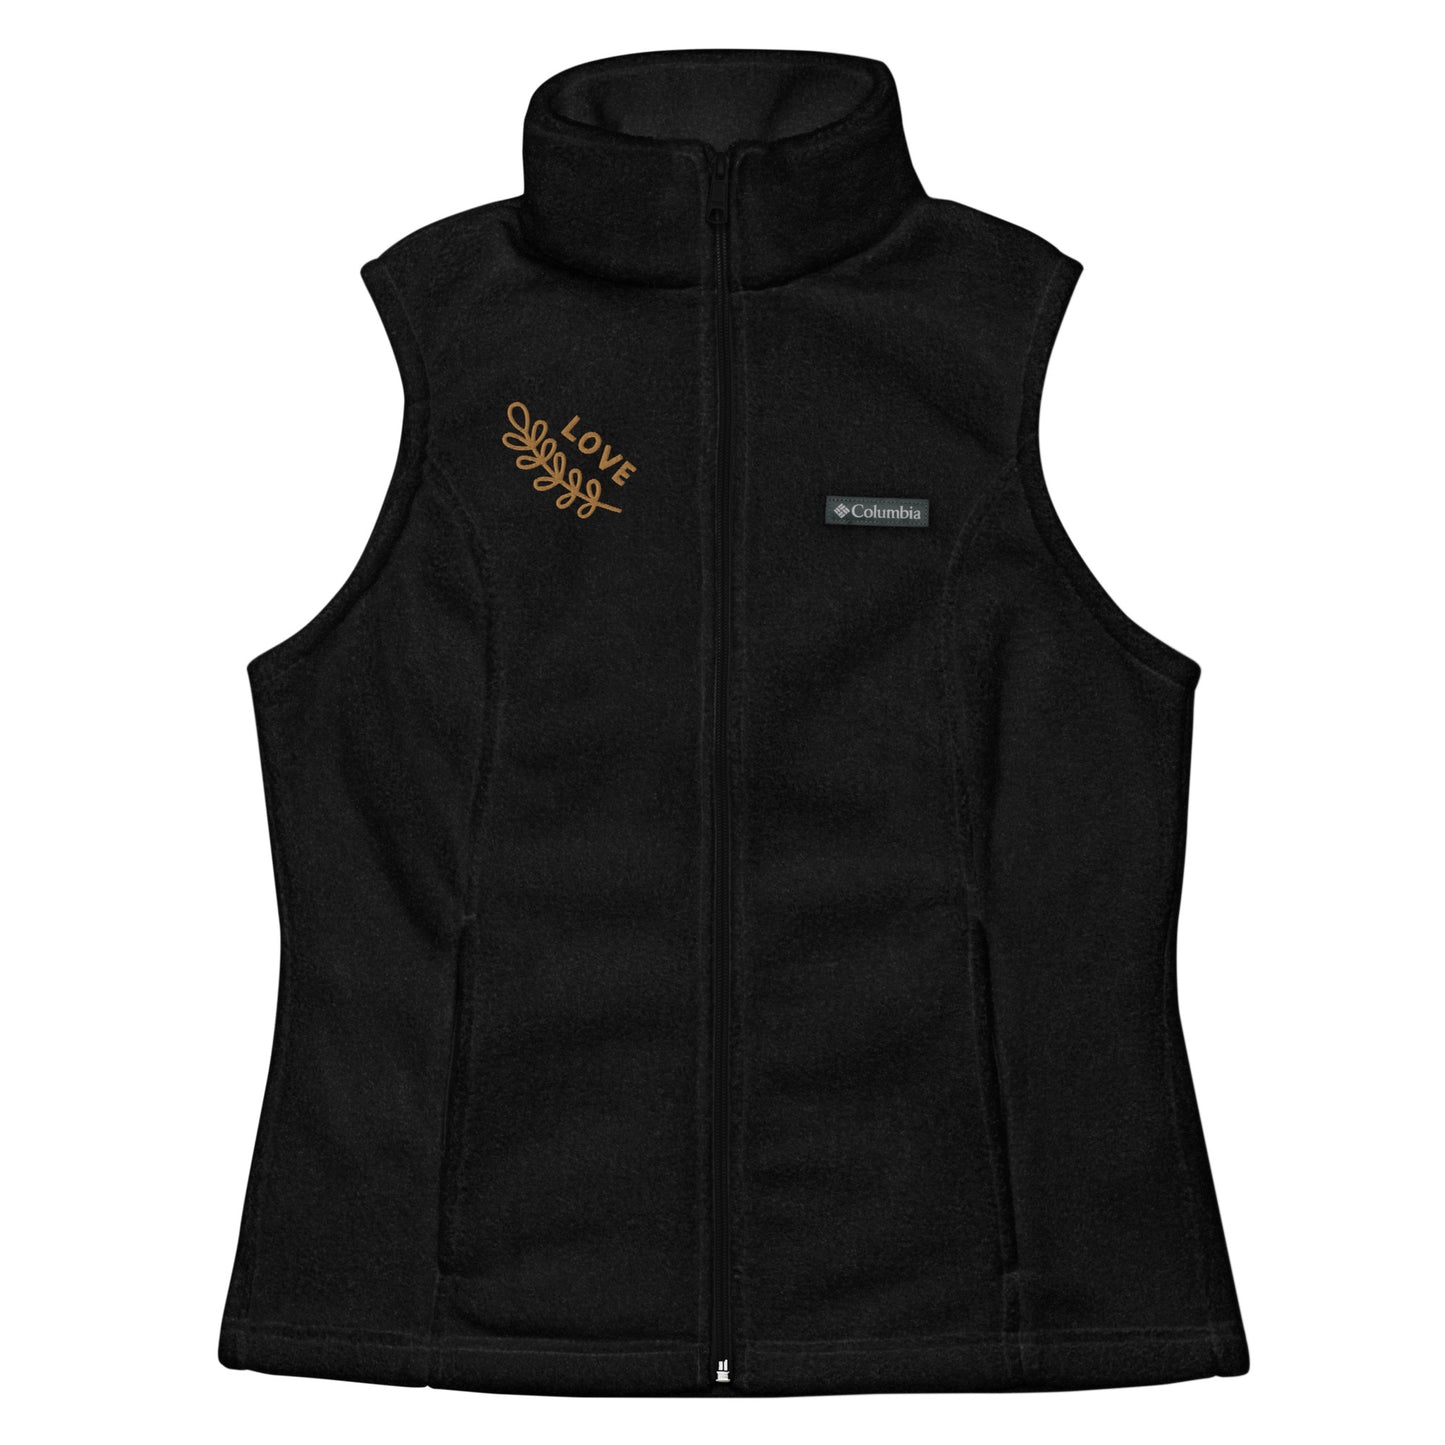 Women’s Columbia fleece vest with custom embroidery- old gold color "Love"